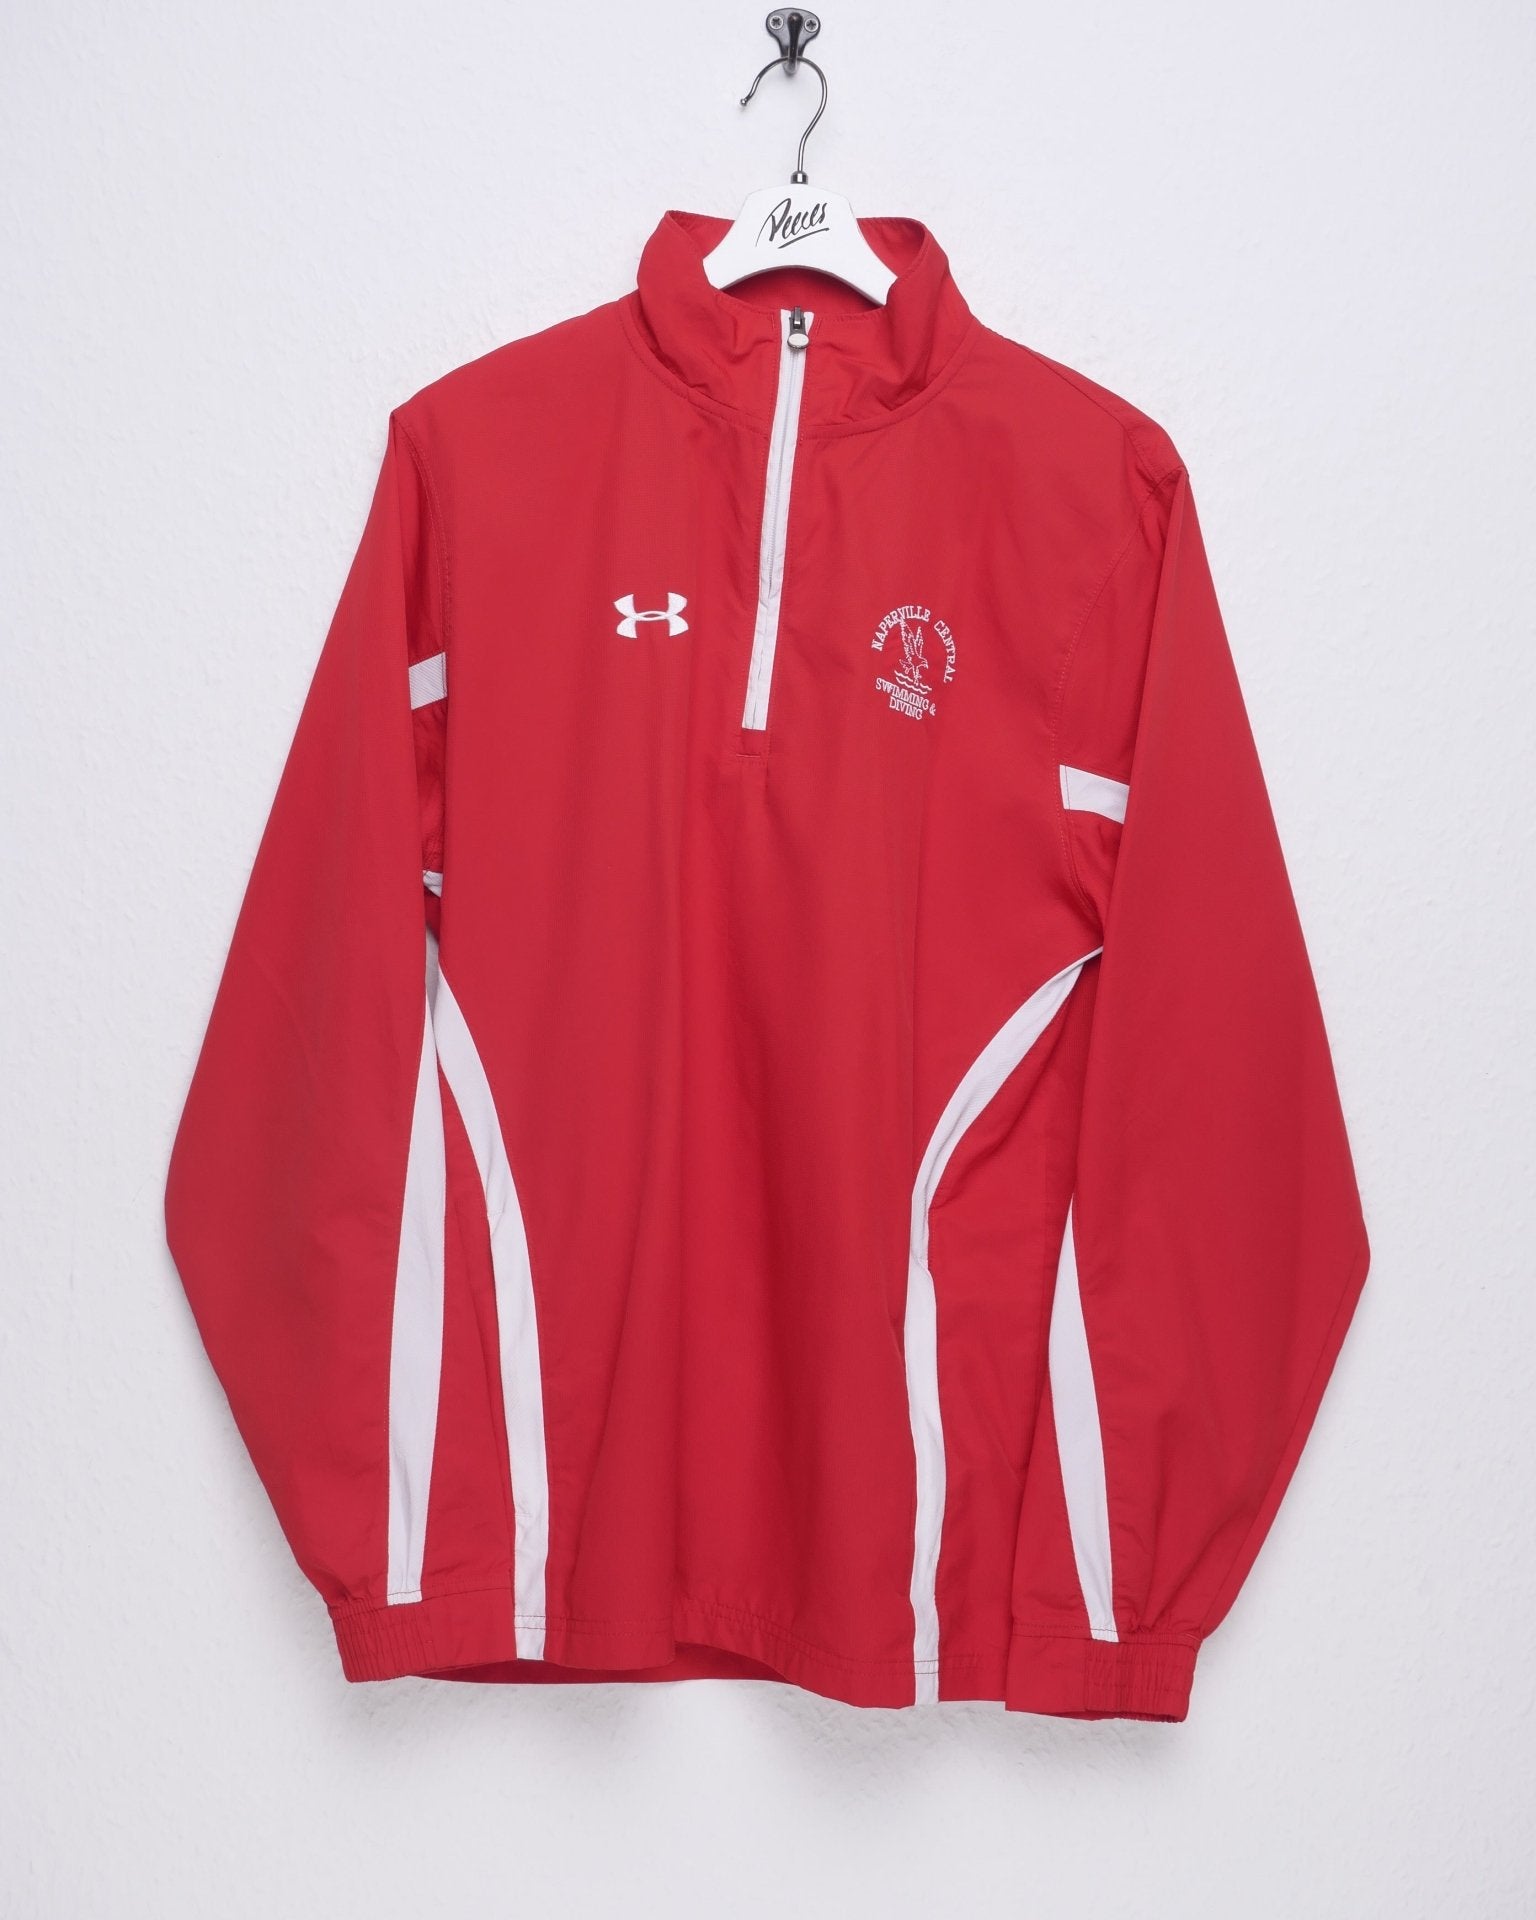 Under Amour Naperville Central Swimming & Diving embroidered Logo red Windbreaker Track Jacke - Peeces